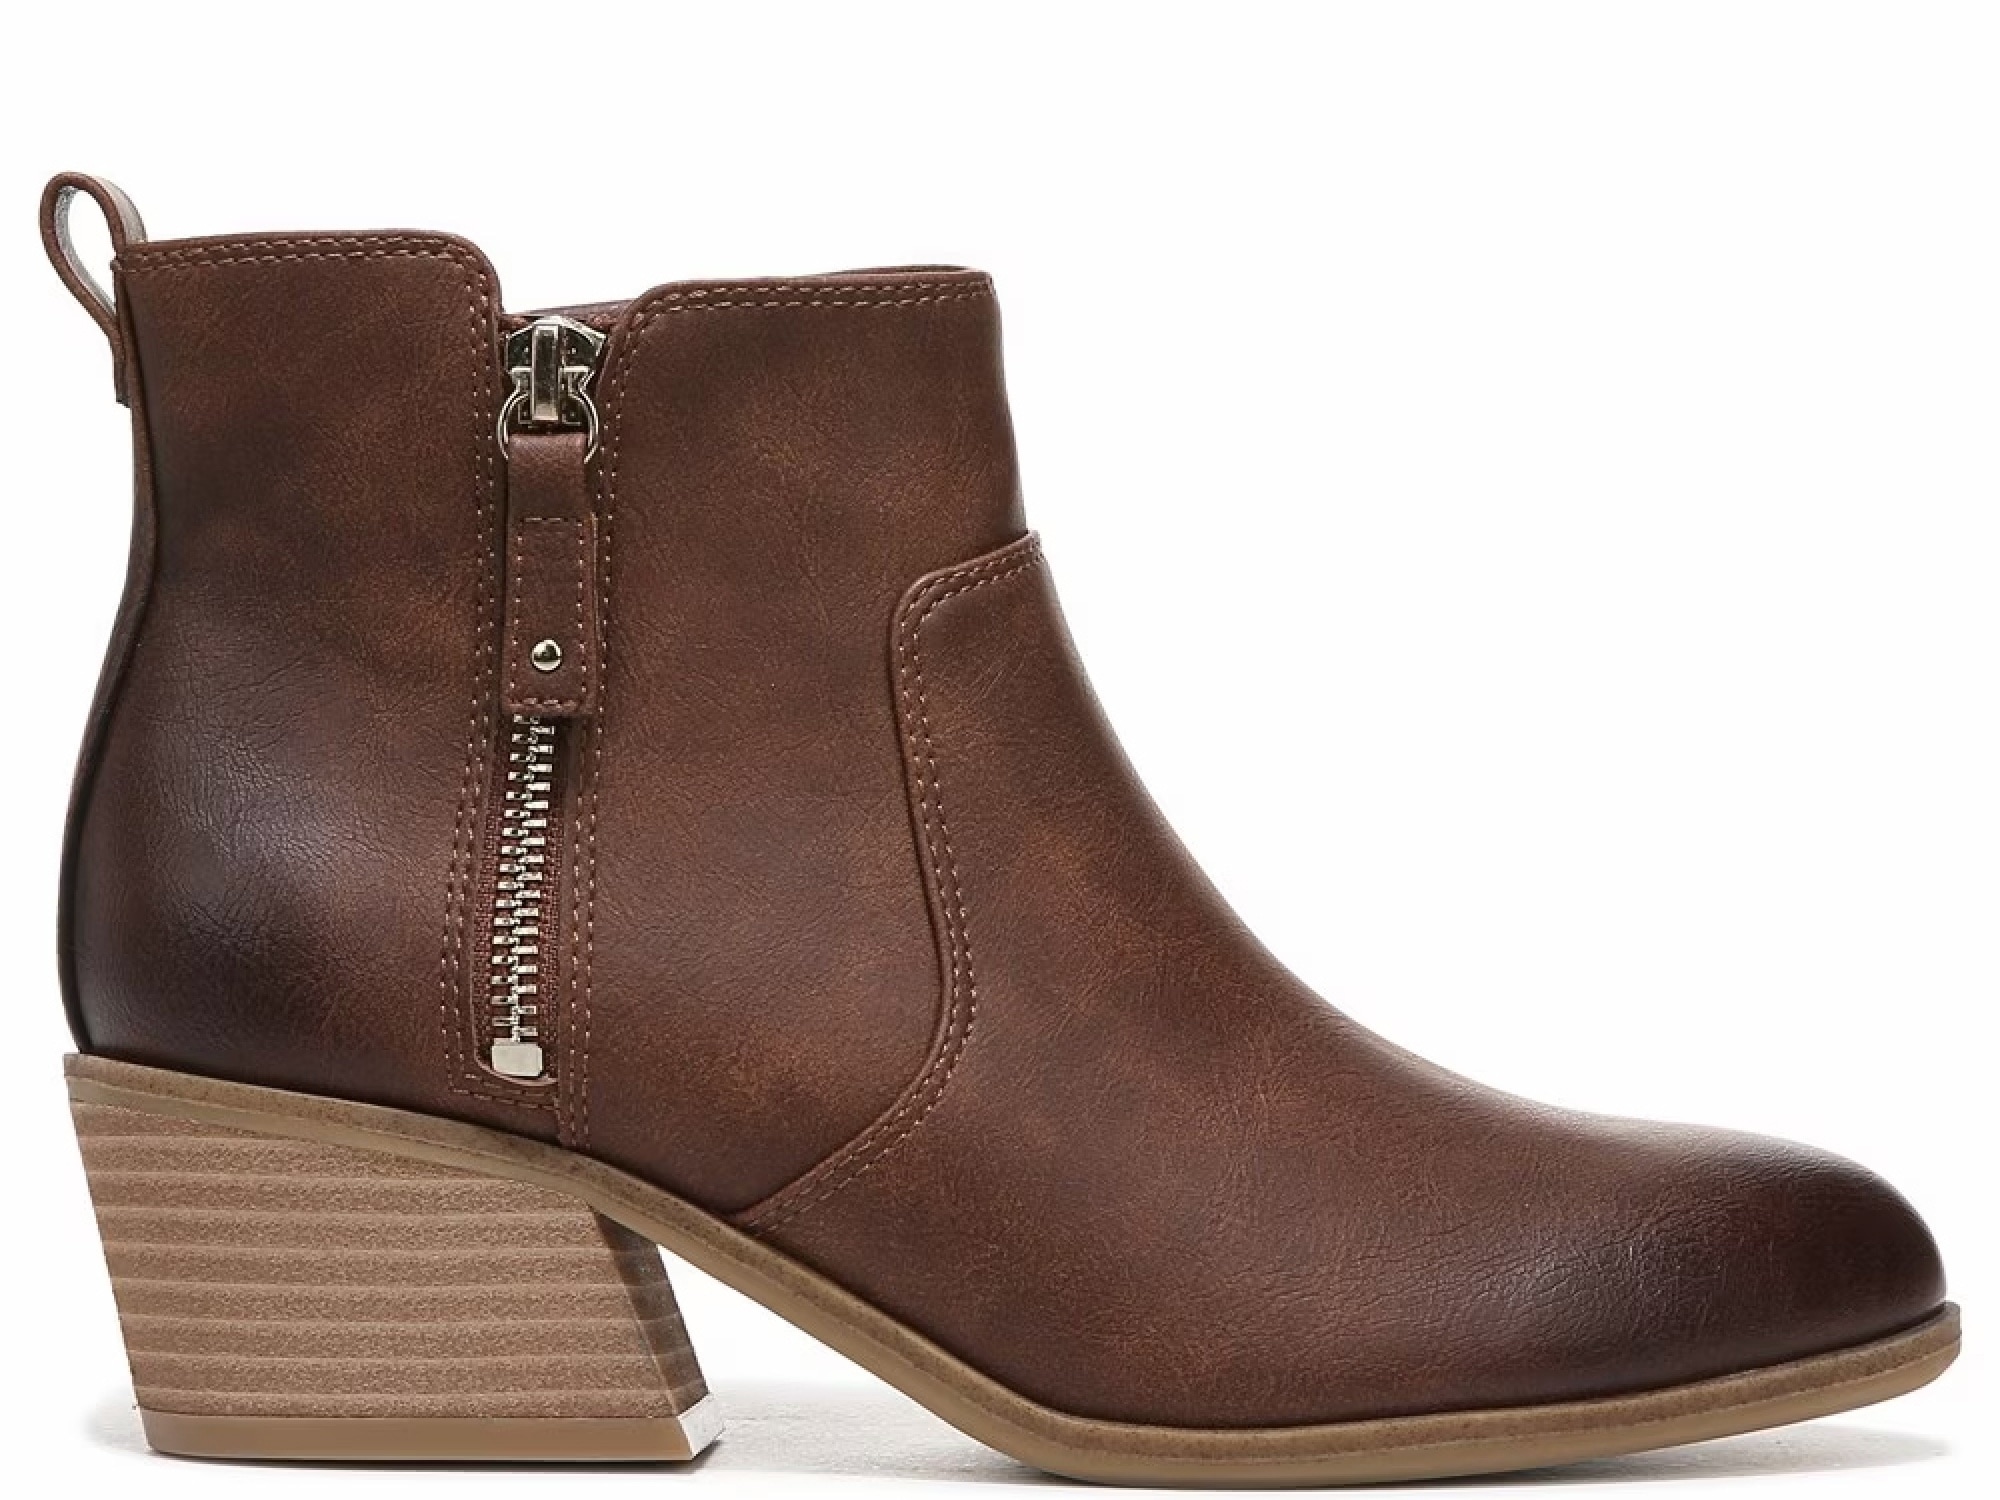 lawless ankle boot in Copper Brown